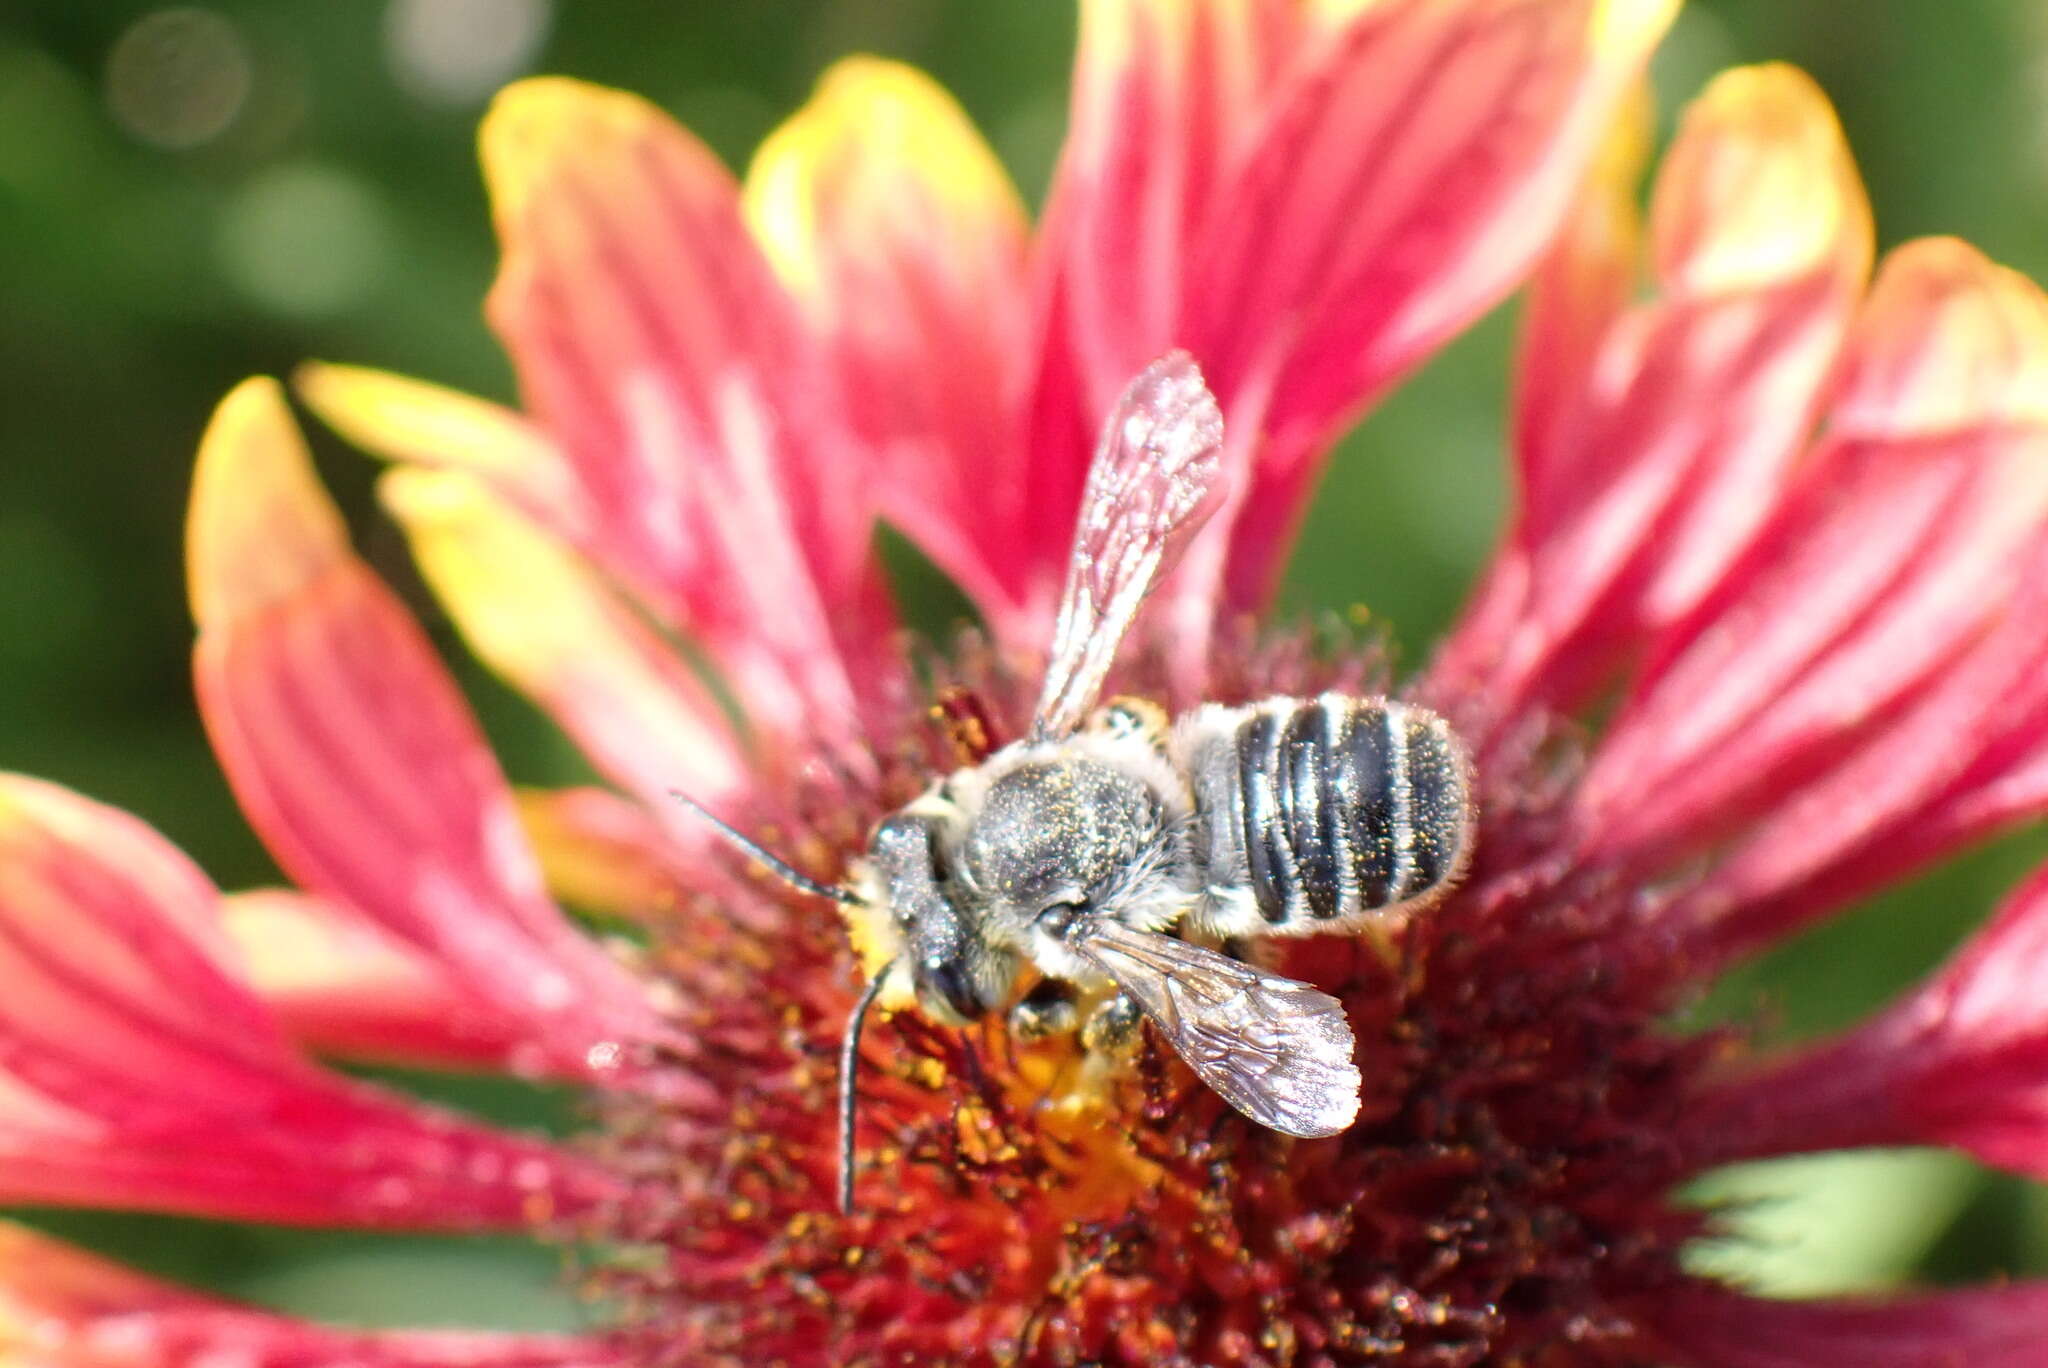 Image of Hoary Leaf-cutter Bee